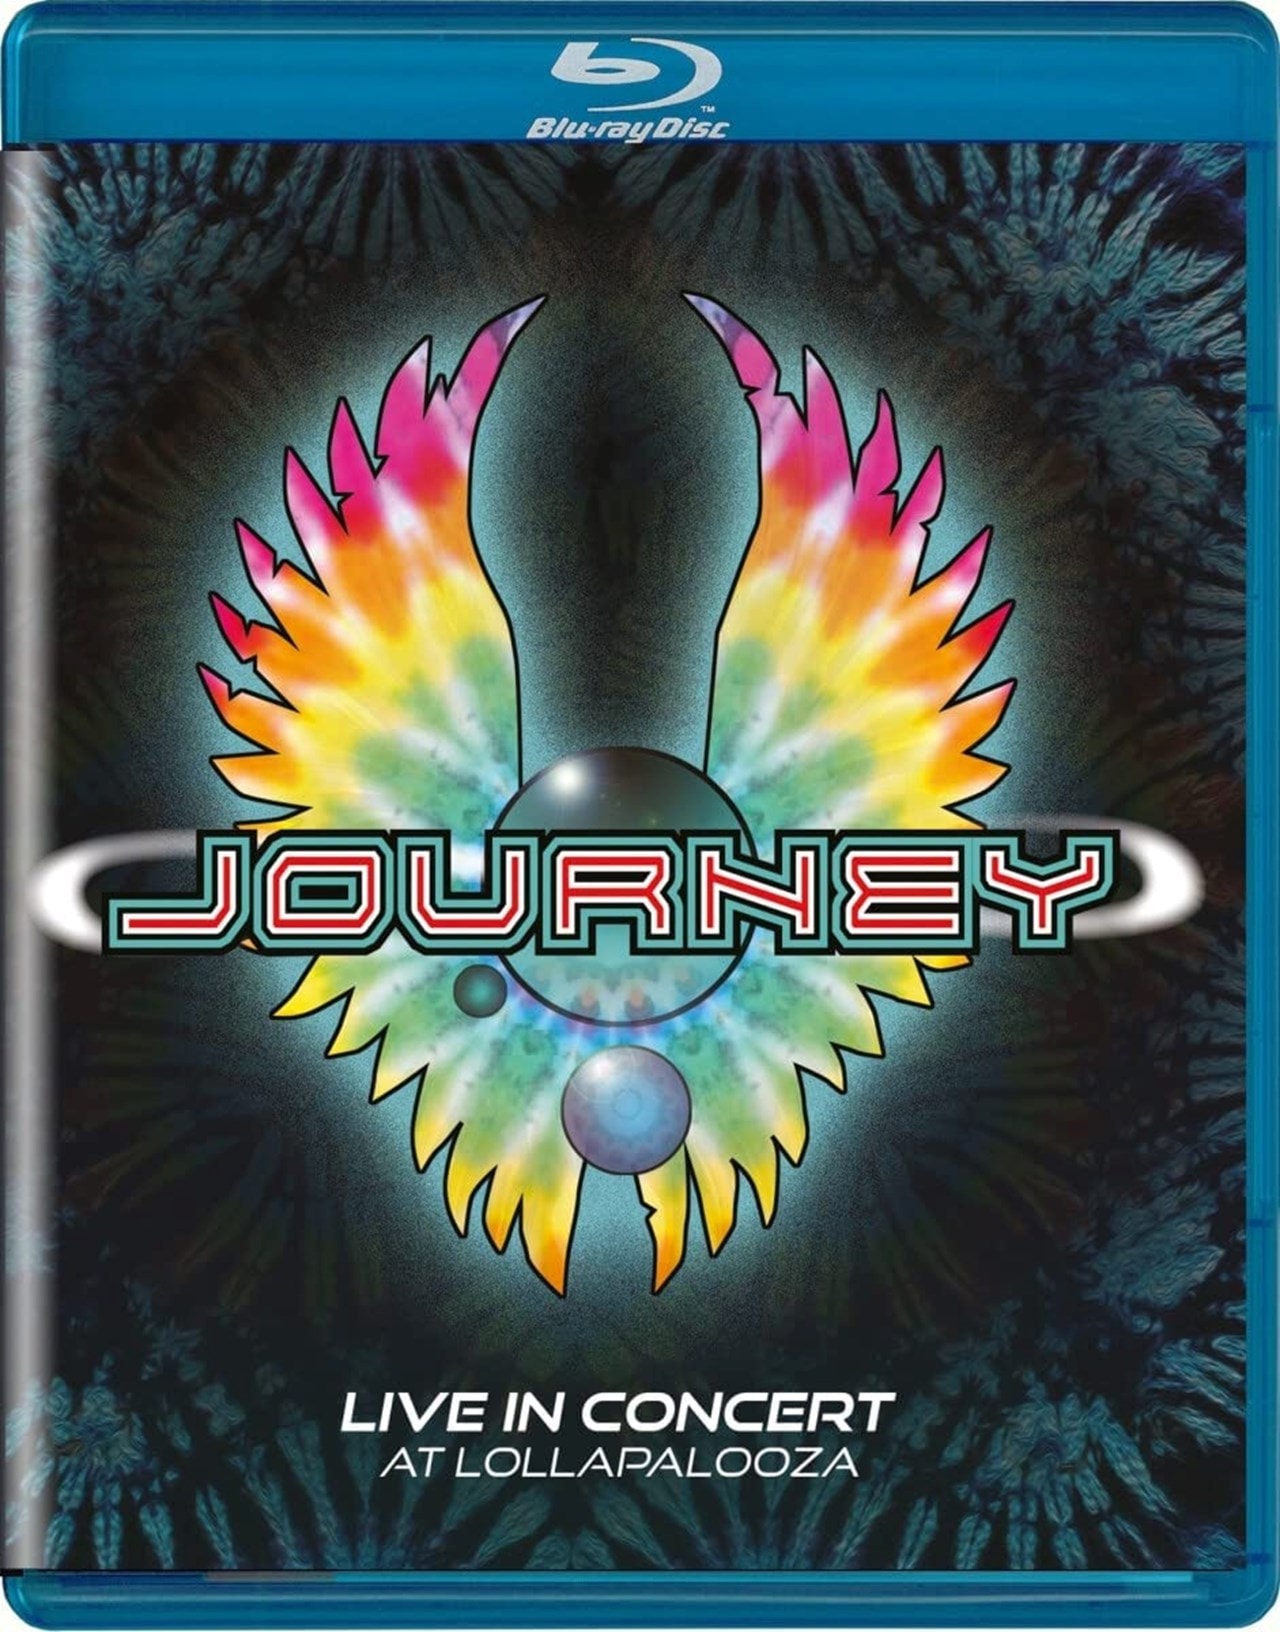 Live journey. Journey Live in Concert at Lollapalooza 2022. Journey "Live in Manila".